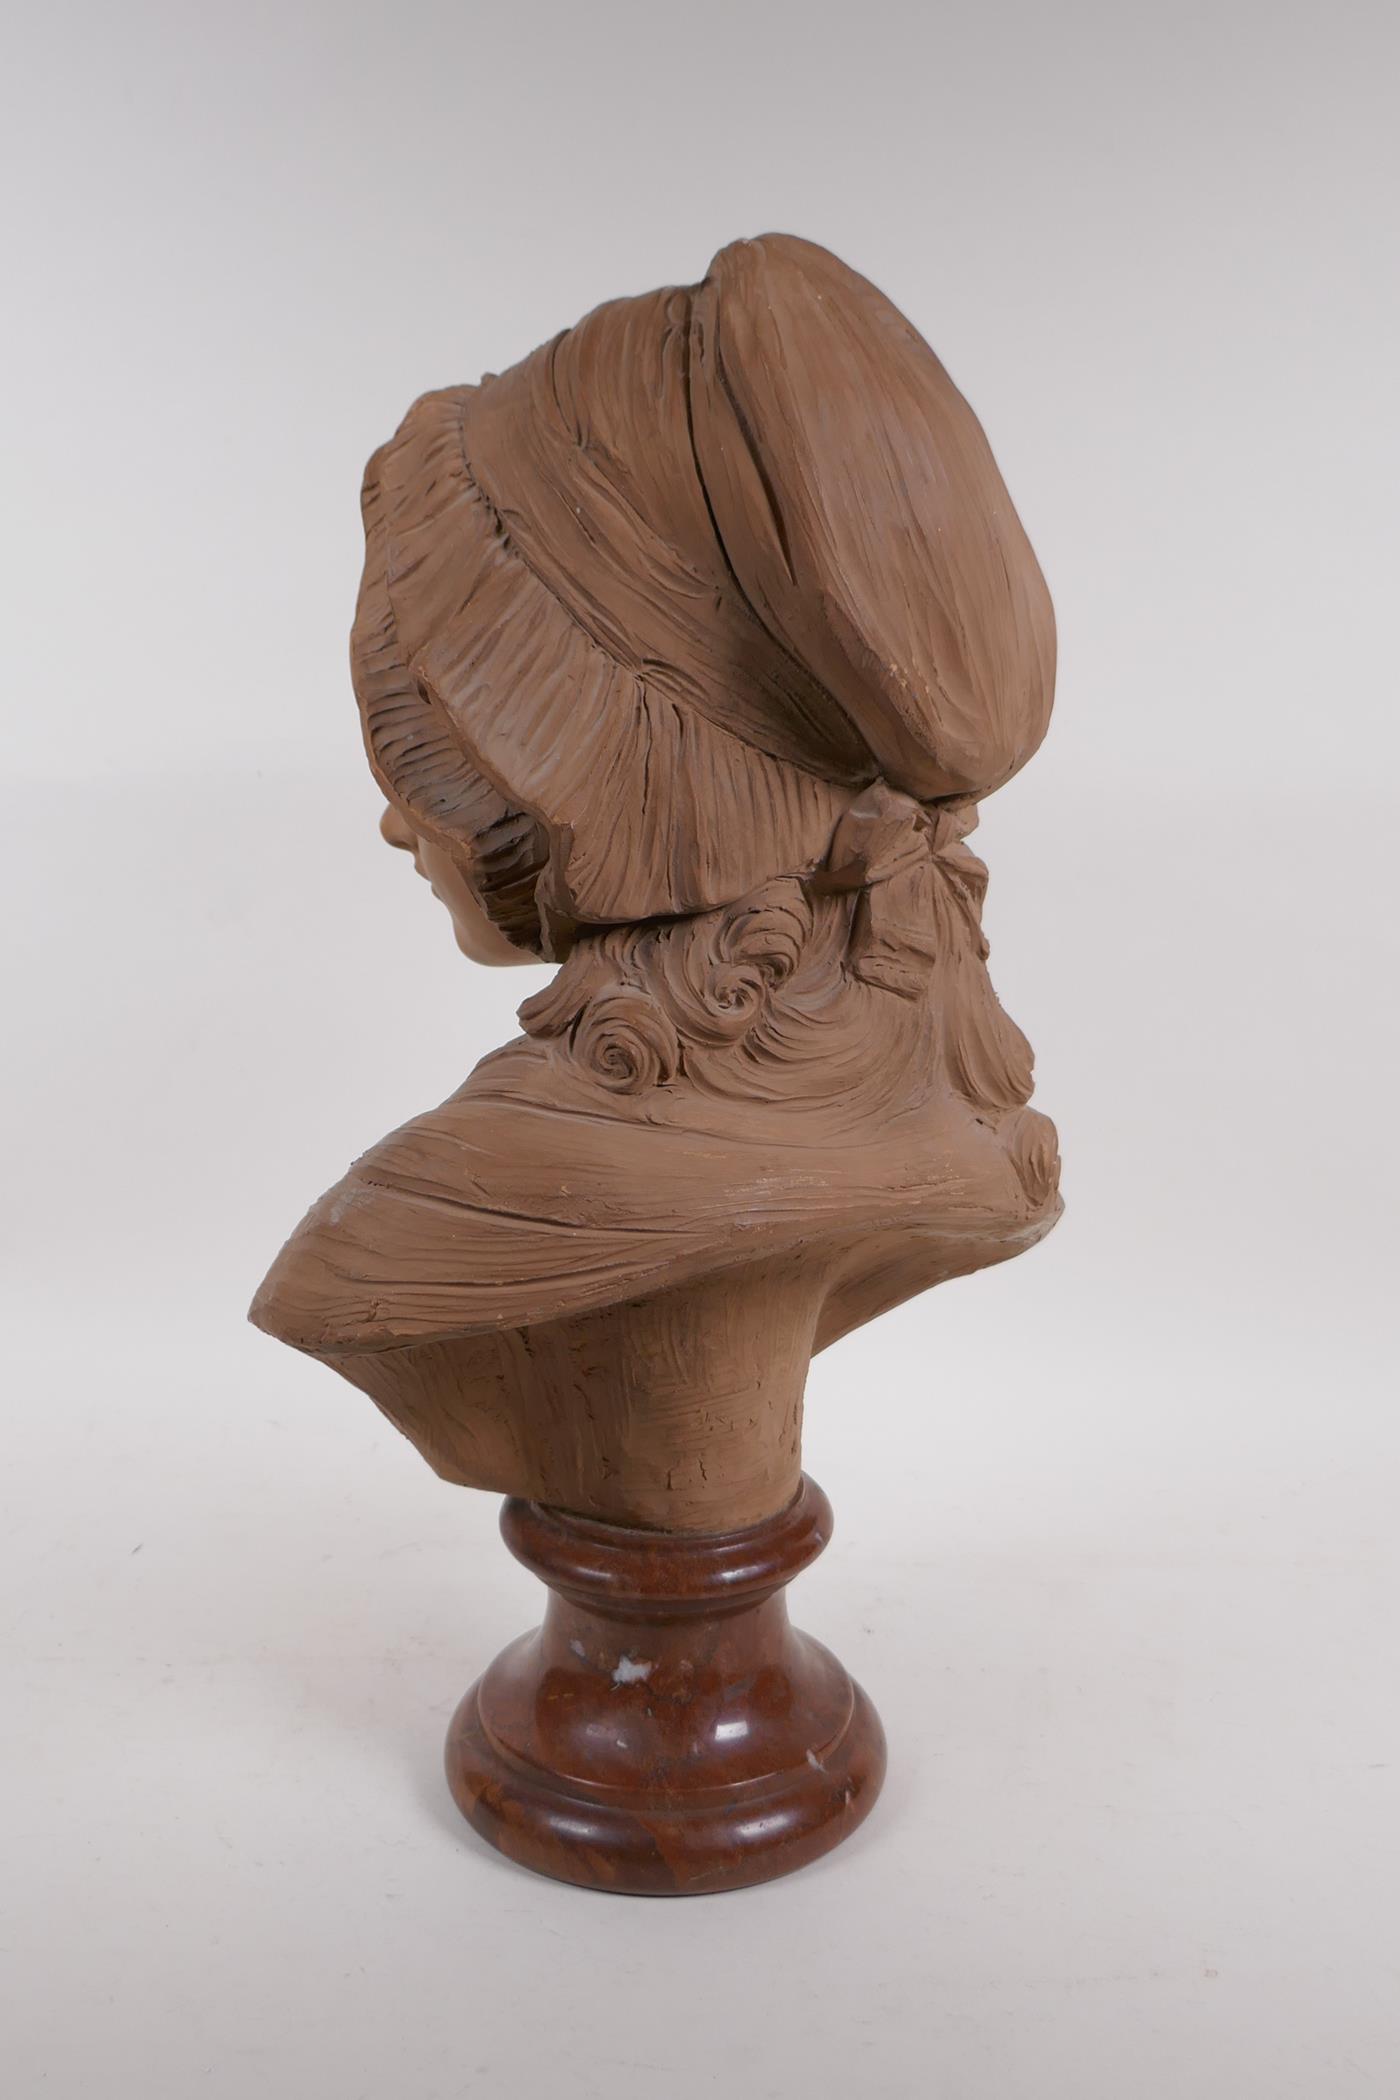 A C19th terracotta bust of a young girl in a bonnet, mounted on a marble socle, 46cm high - Image 3 of 4